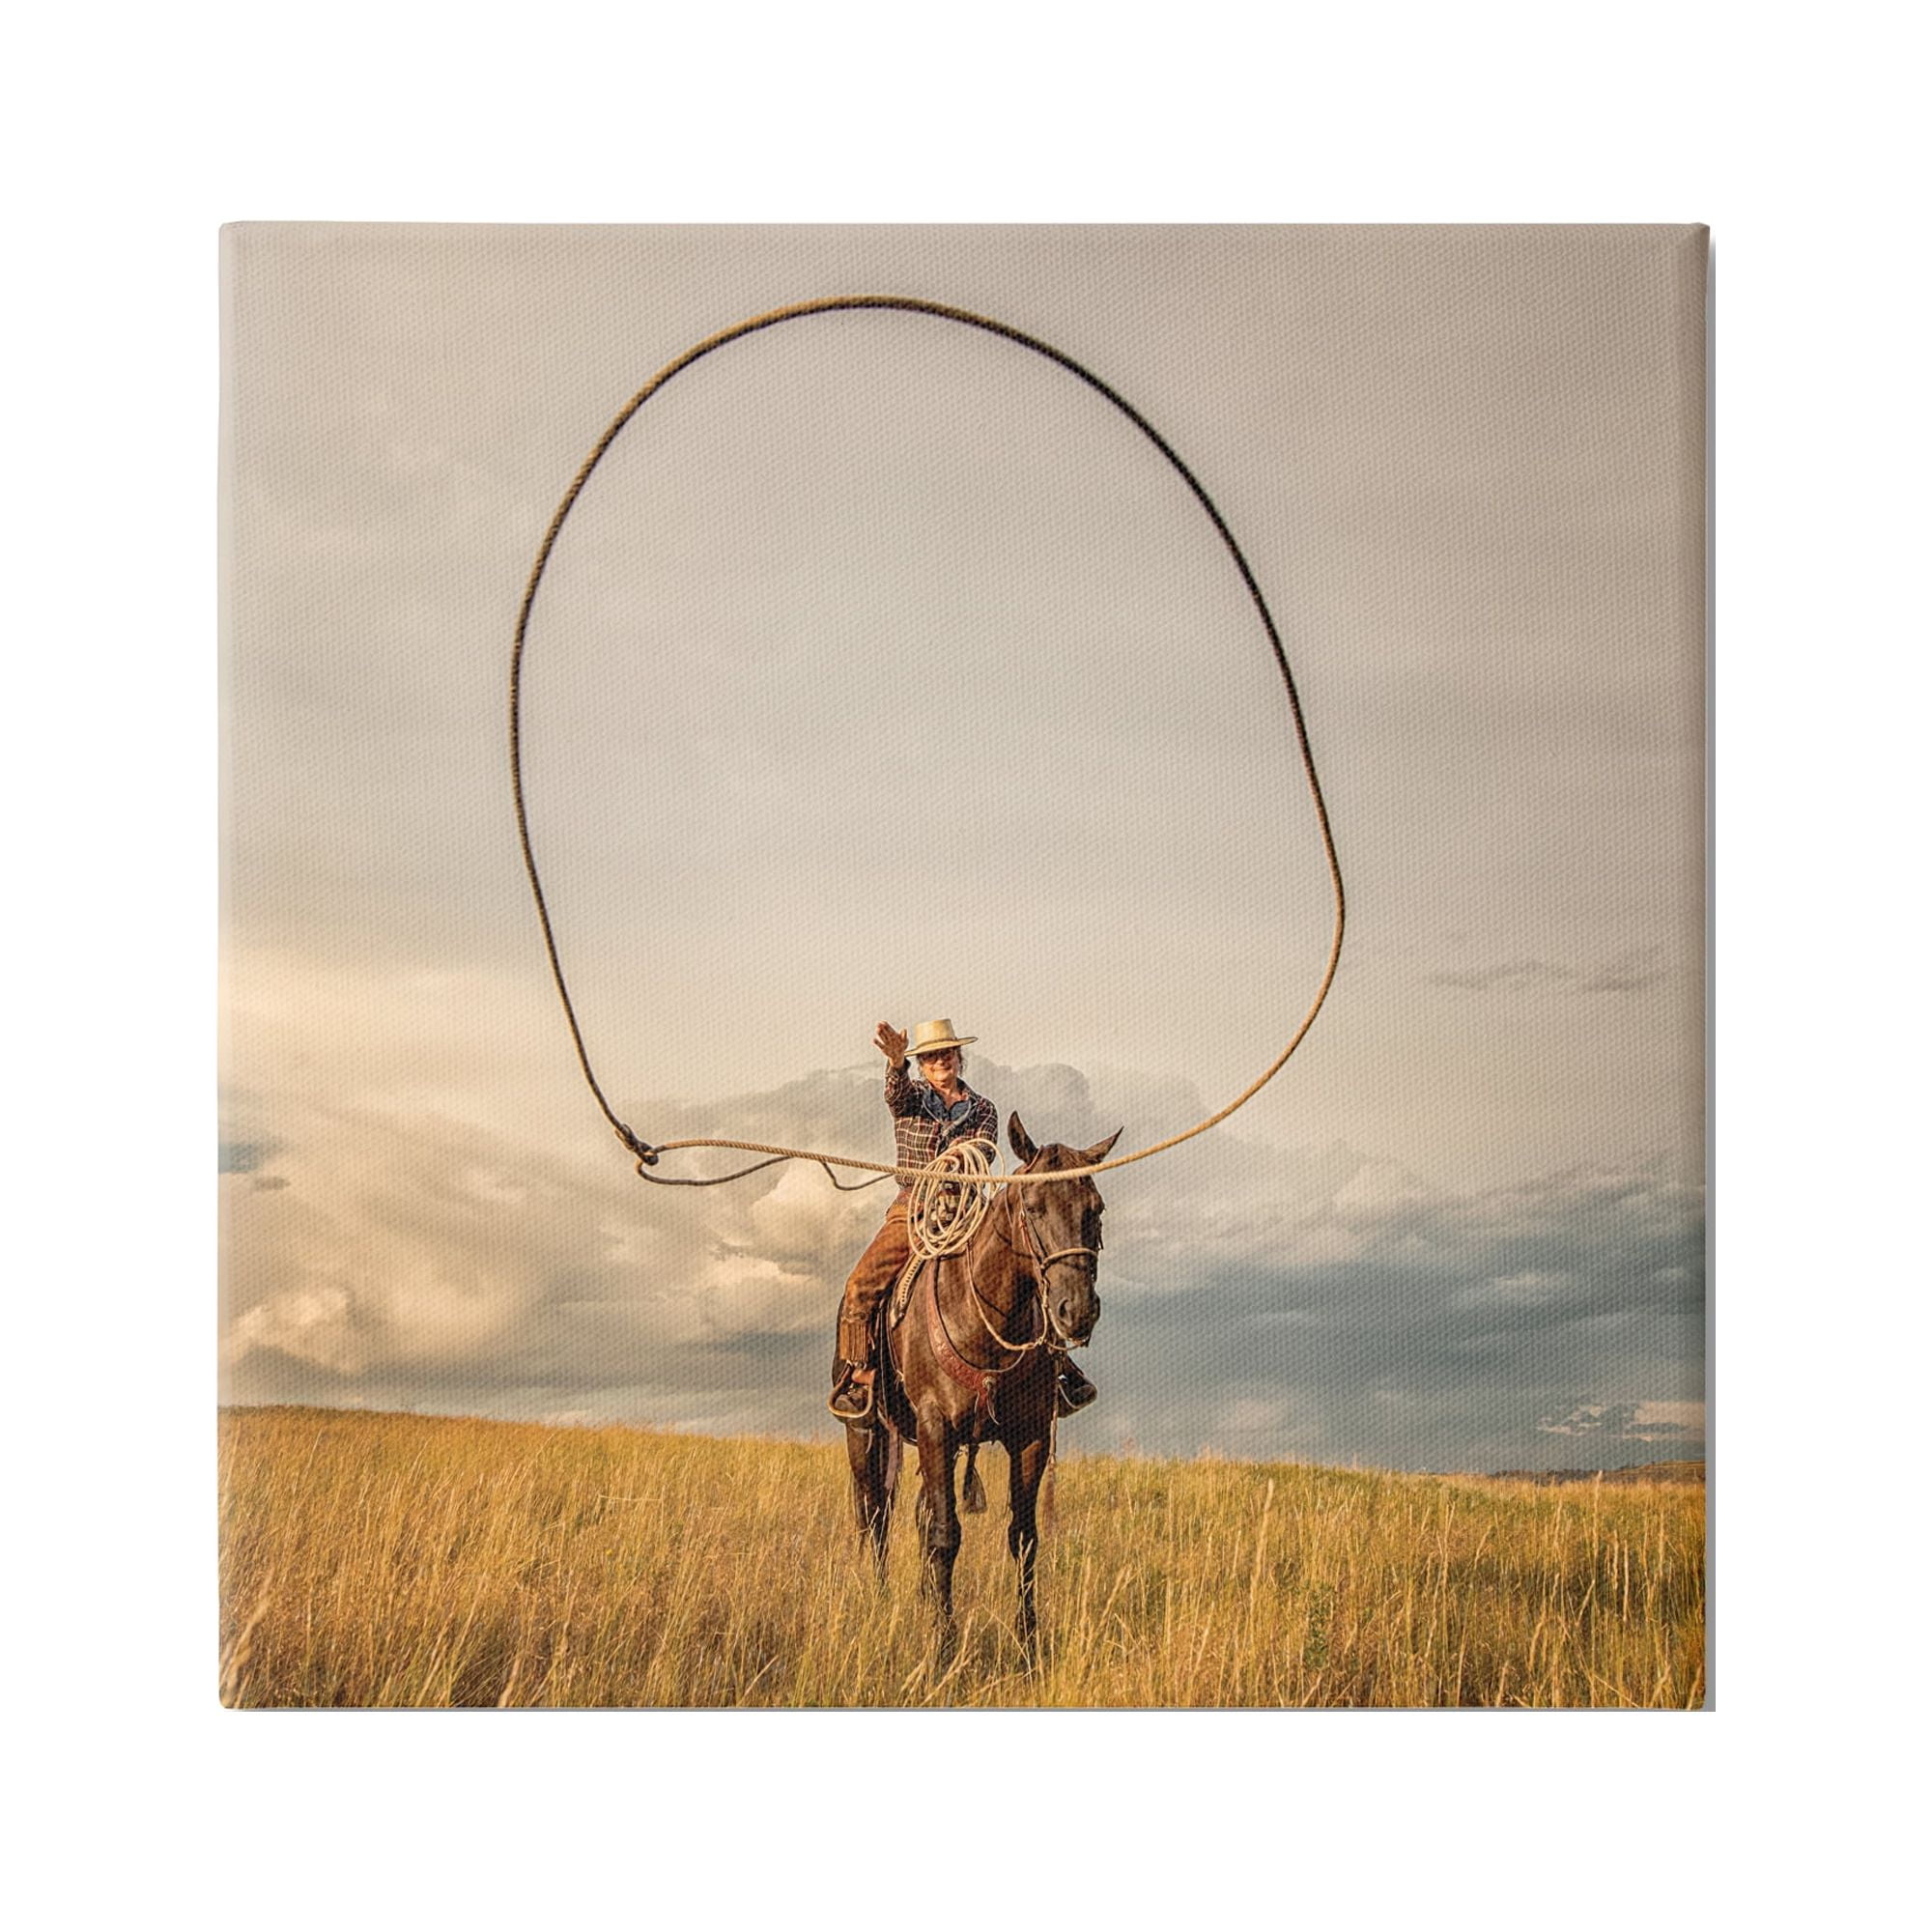 Stupell Industries Cowboy Throwing Lasso Animals & Insects Photography  Gallery Wrapped Canvas Print Wall Art, 17 x 17 